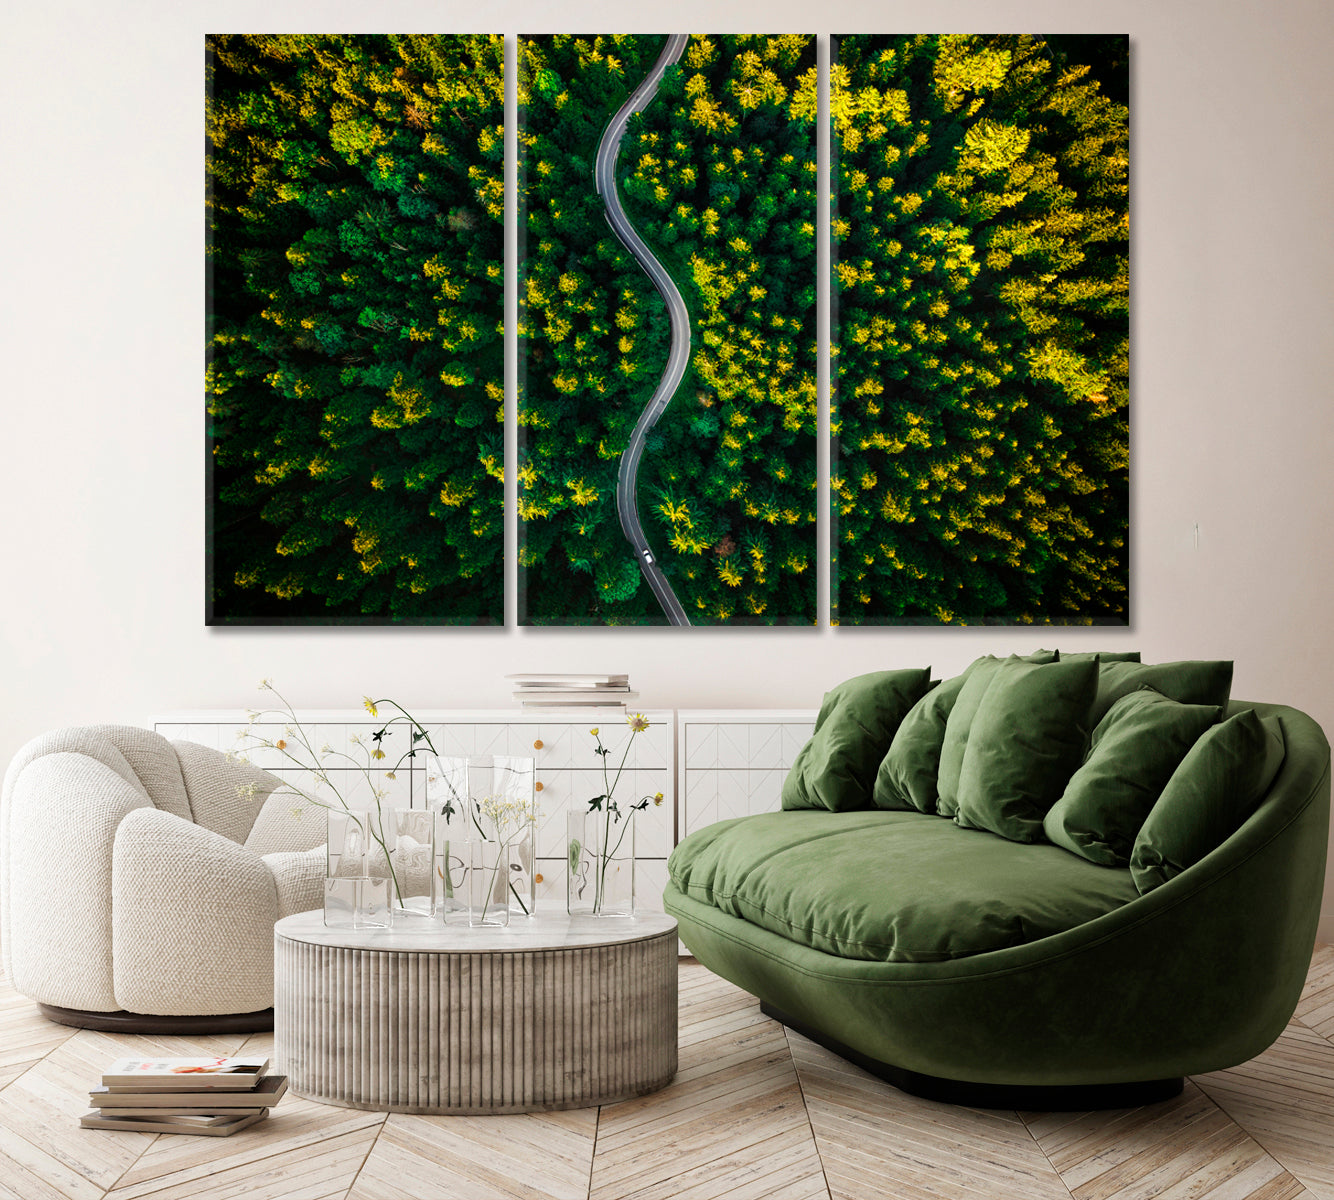 Curvy Road in Pine Forest Canvas Print ArtLexy 3 Panels 36"x24" inches 